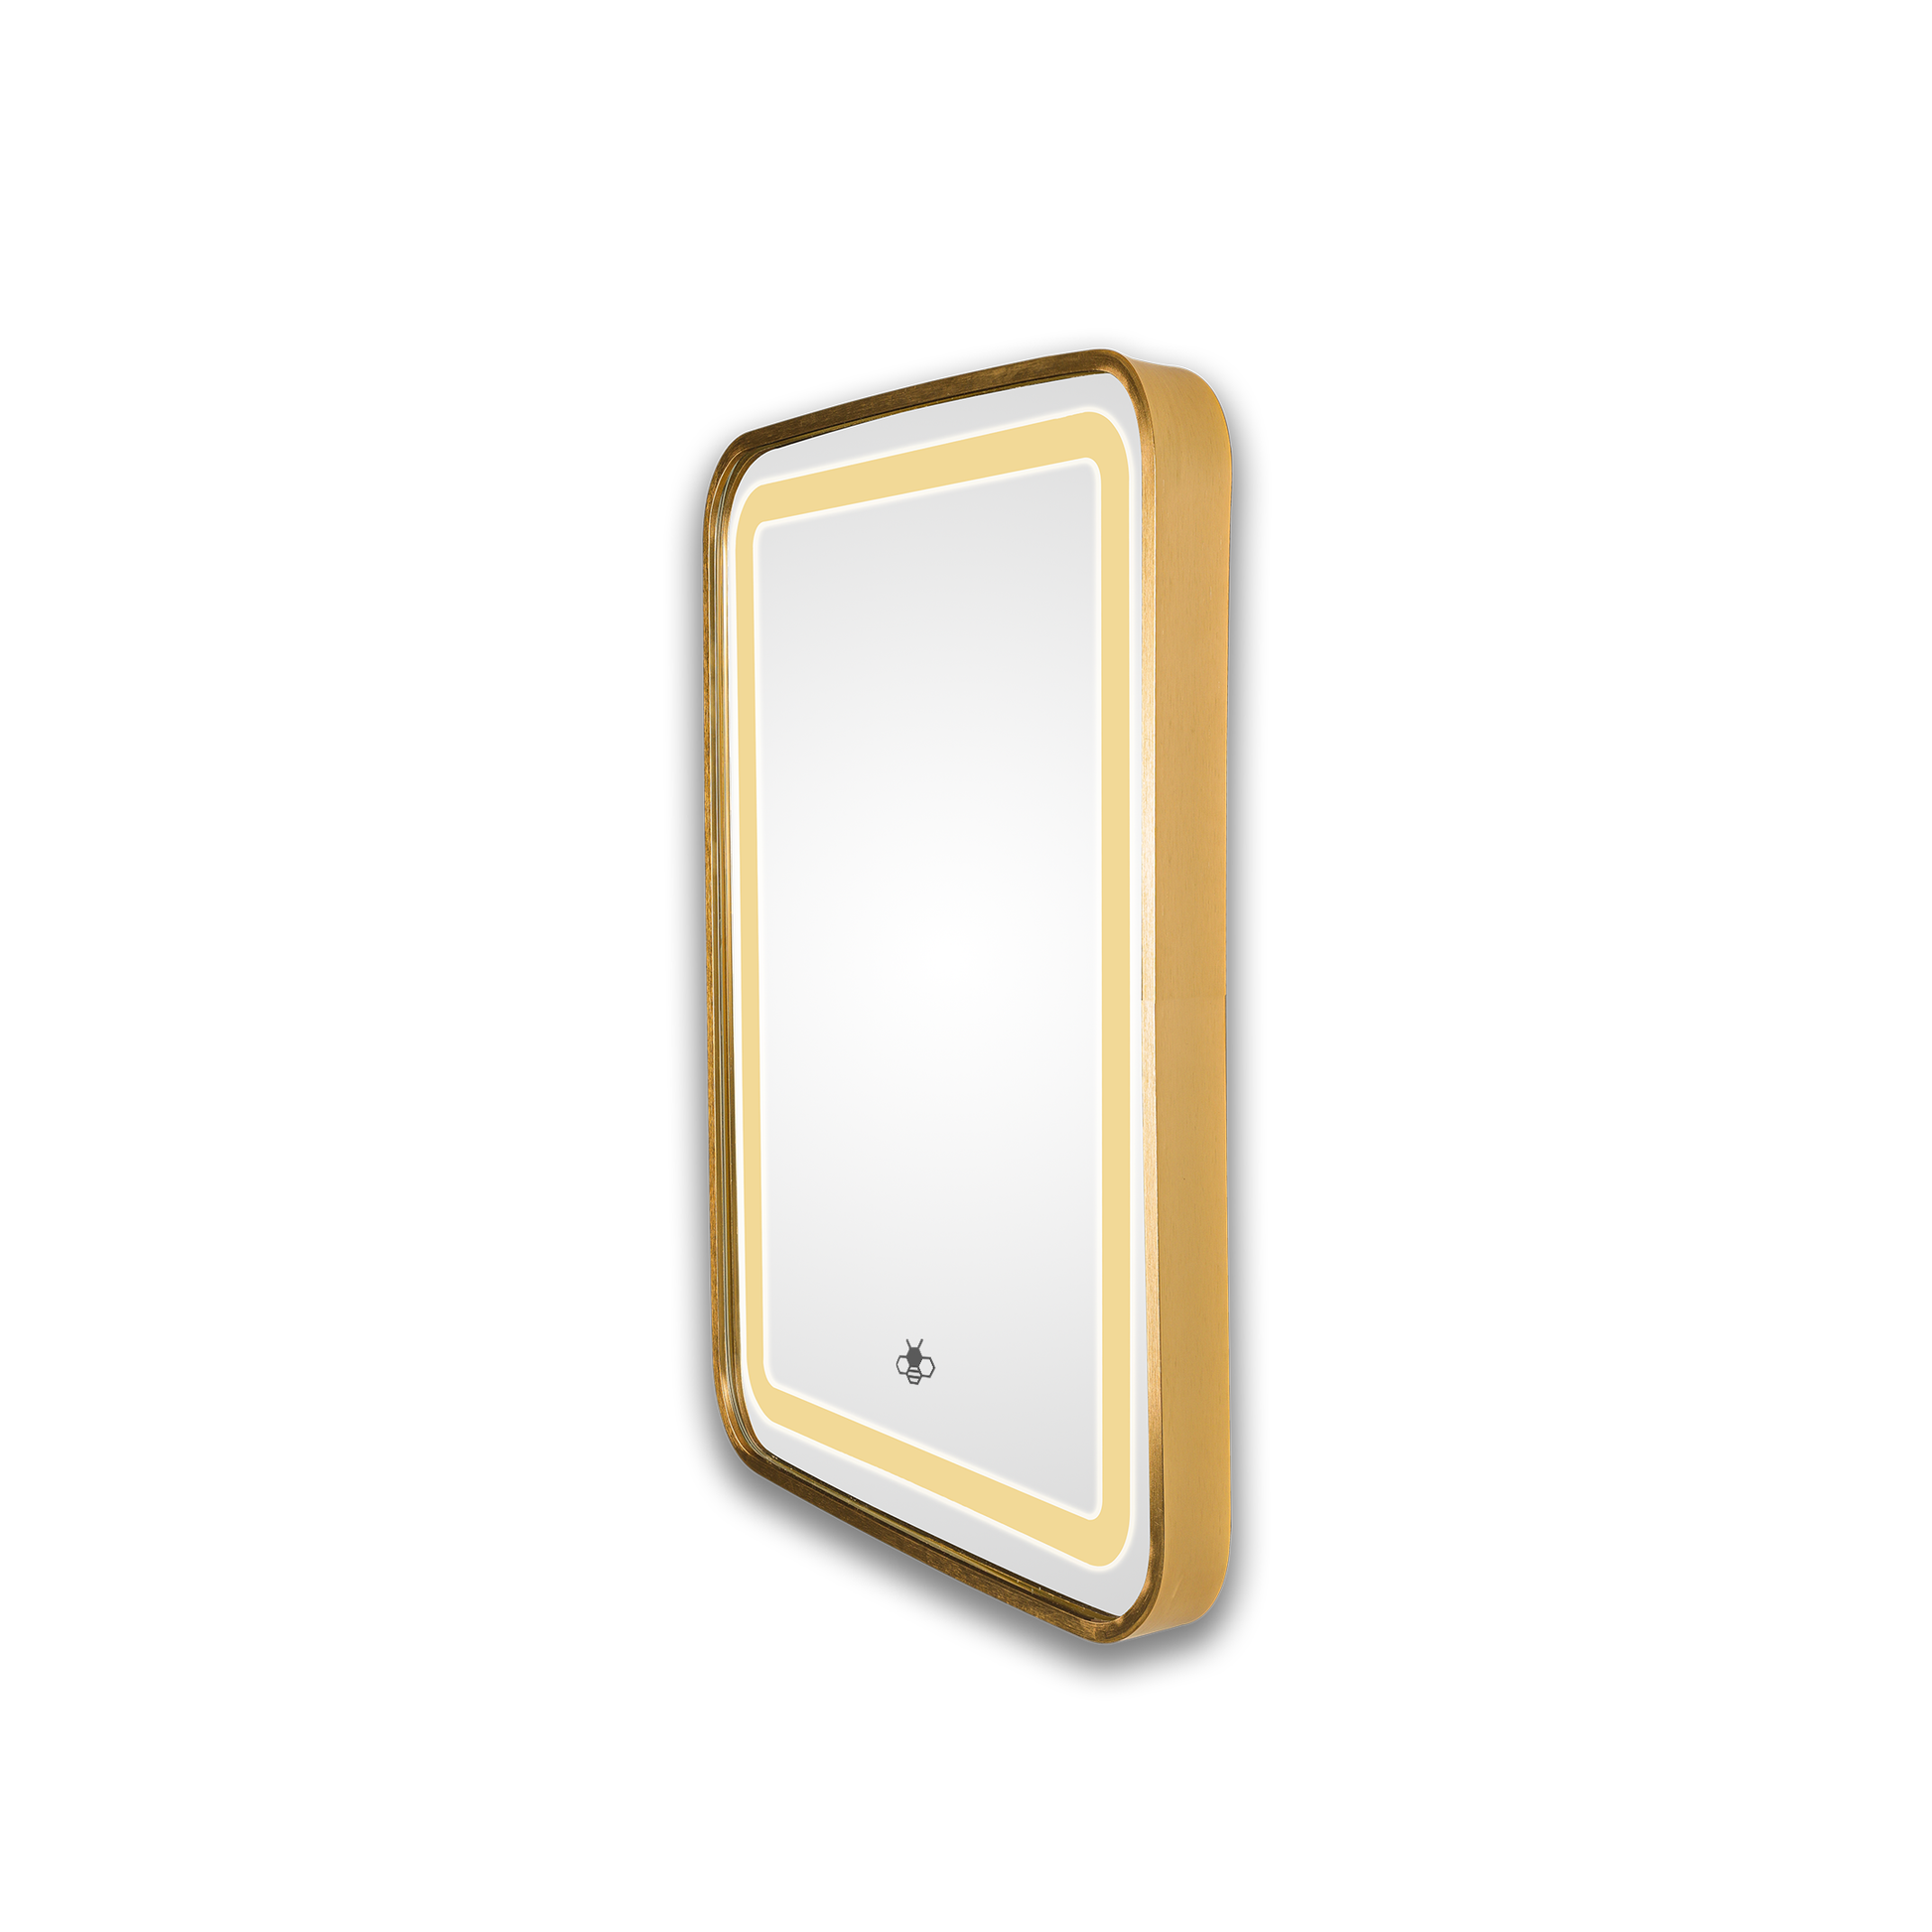 5b5d2aaa-a40b-4e22-9a25-a3bd966f8578/Rectangle_vertical_30_gold_side.png